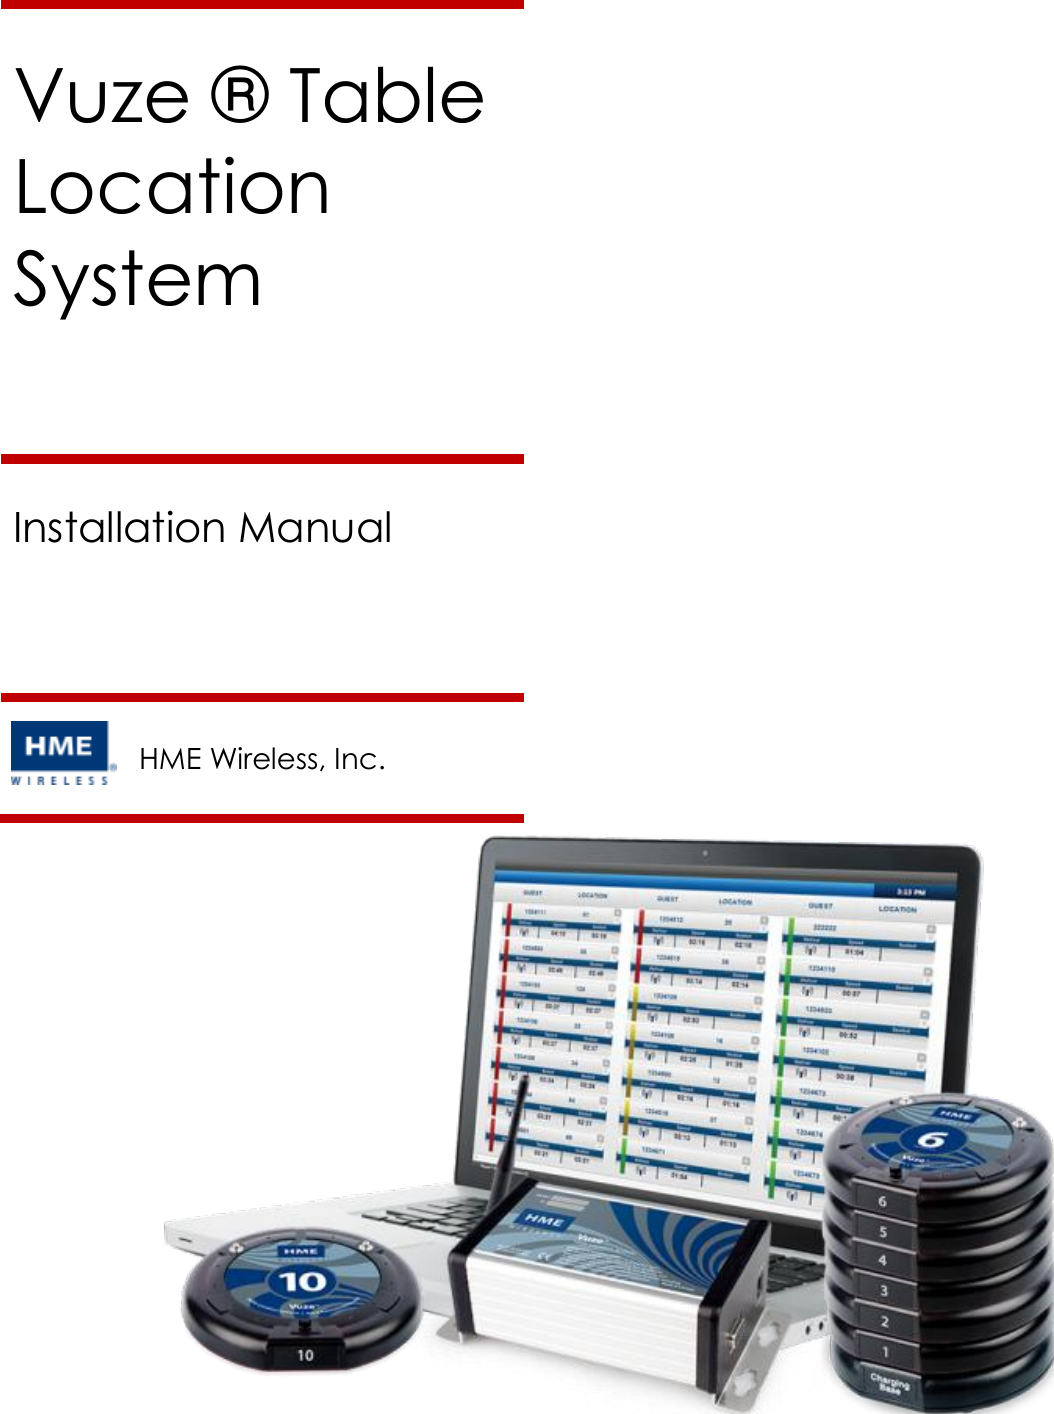        Vuze ® Table Location System Installation Manual HME Wireless, Inc. 